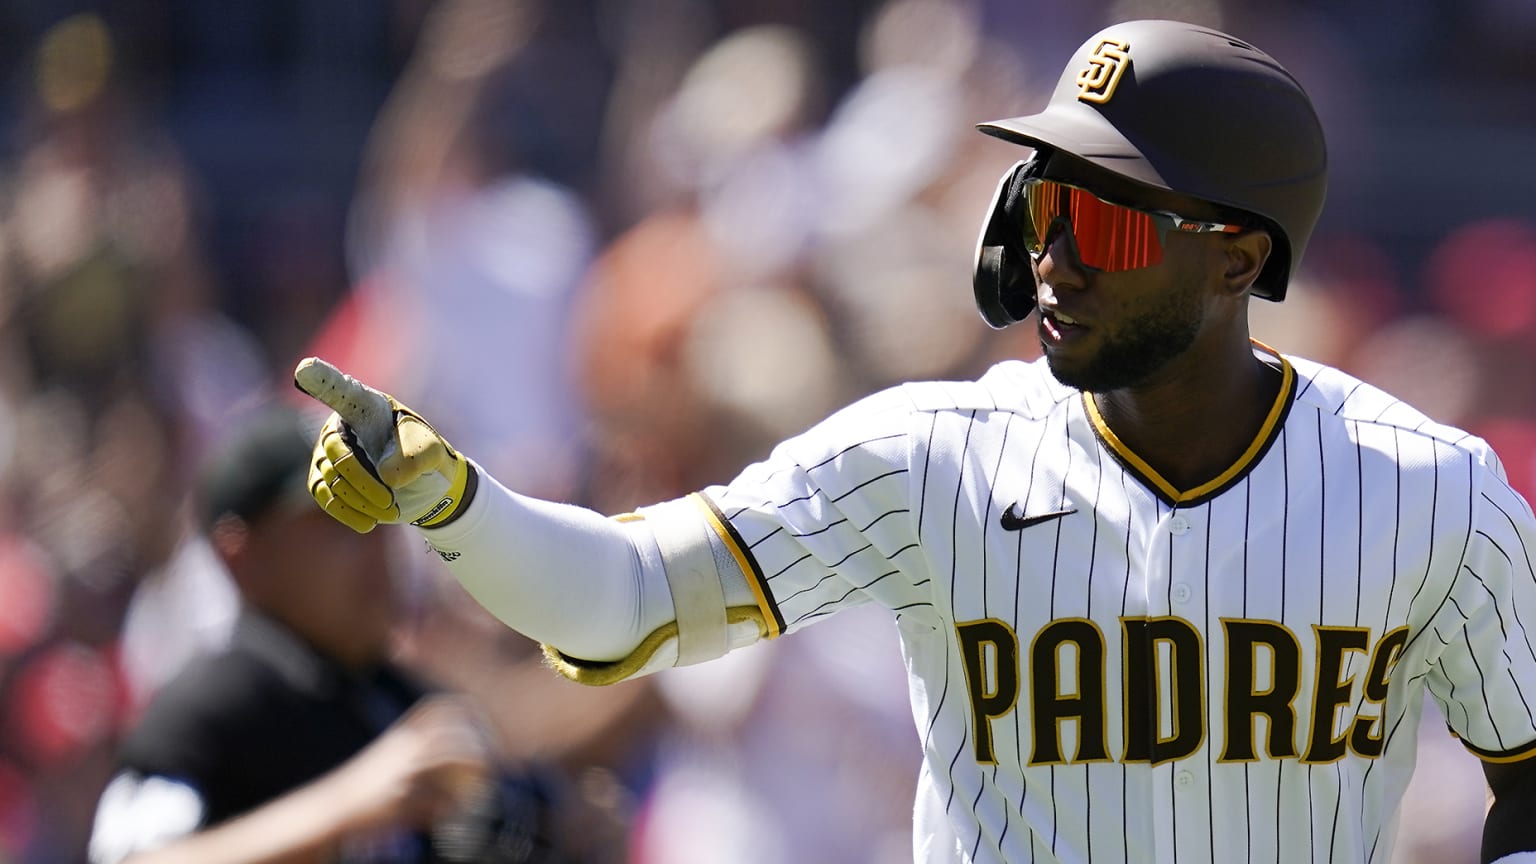 Jurickson Profar points while playing for the Padres last season